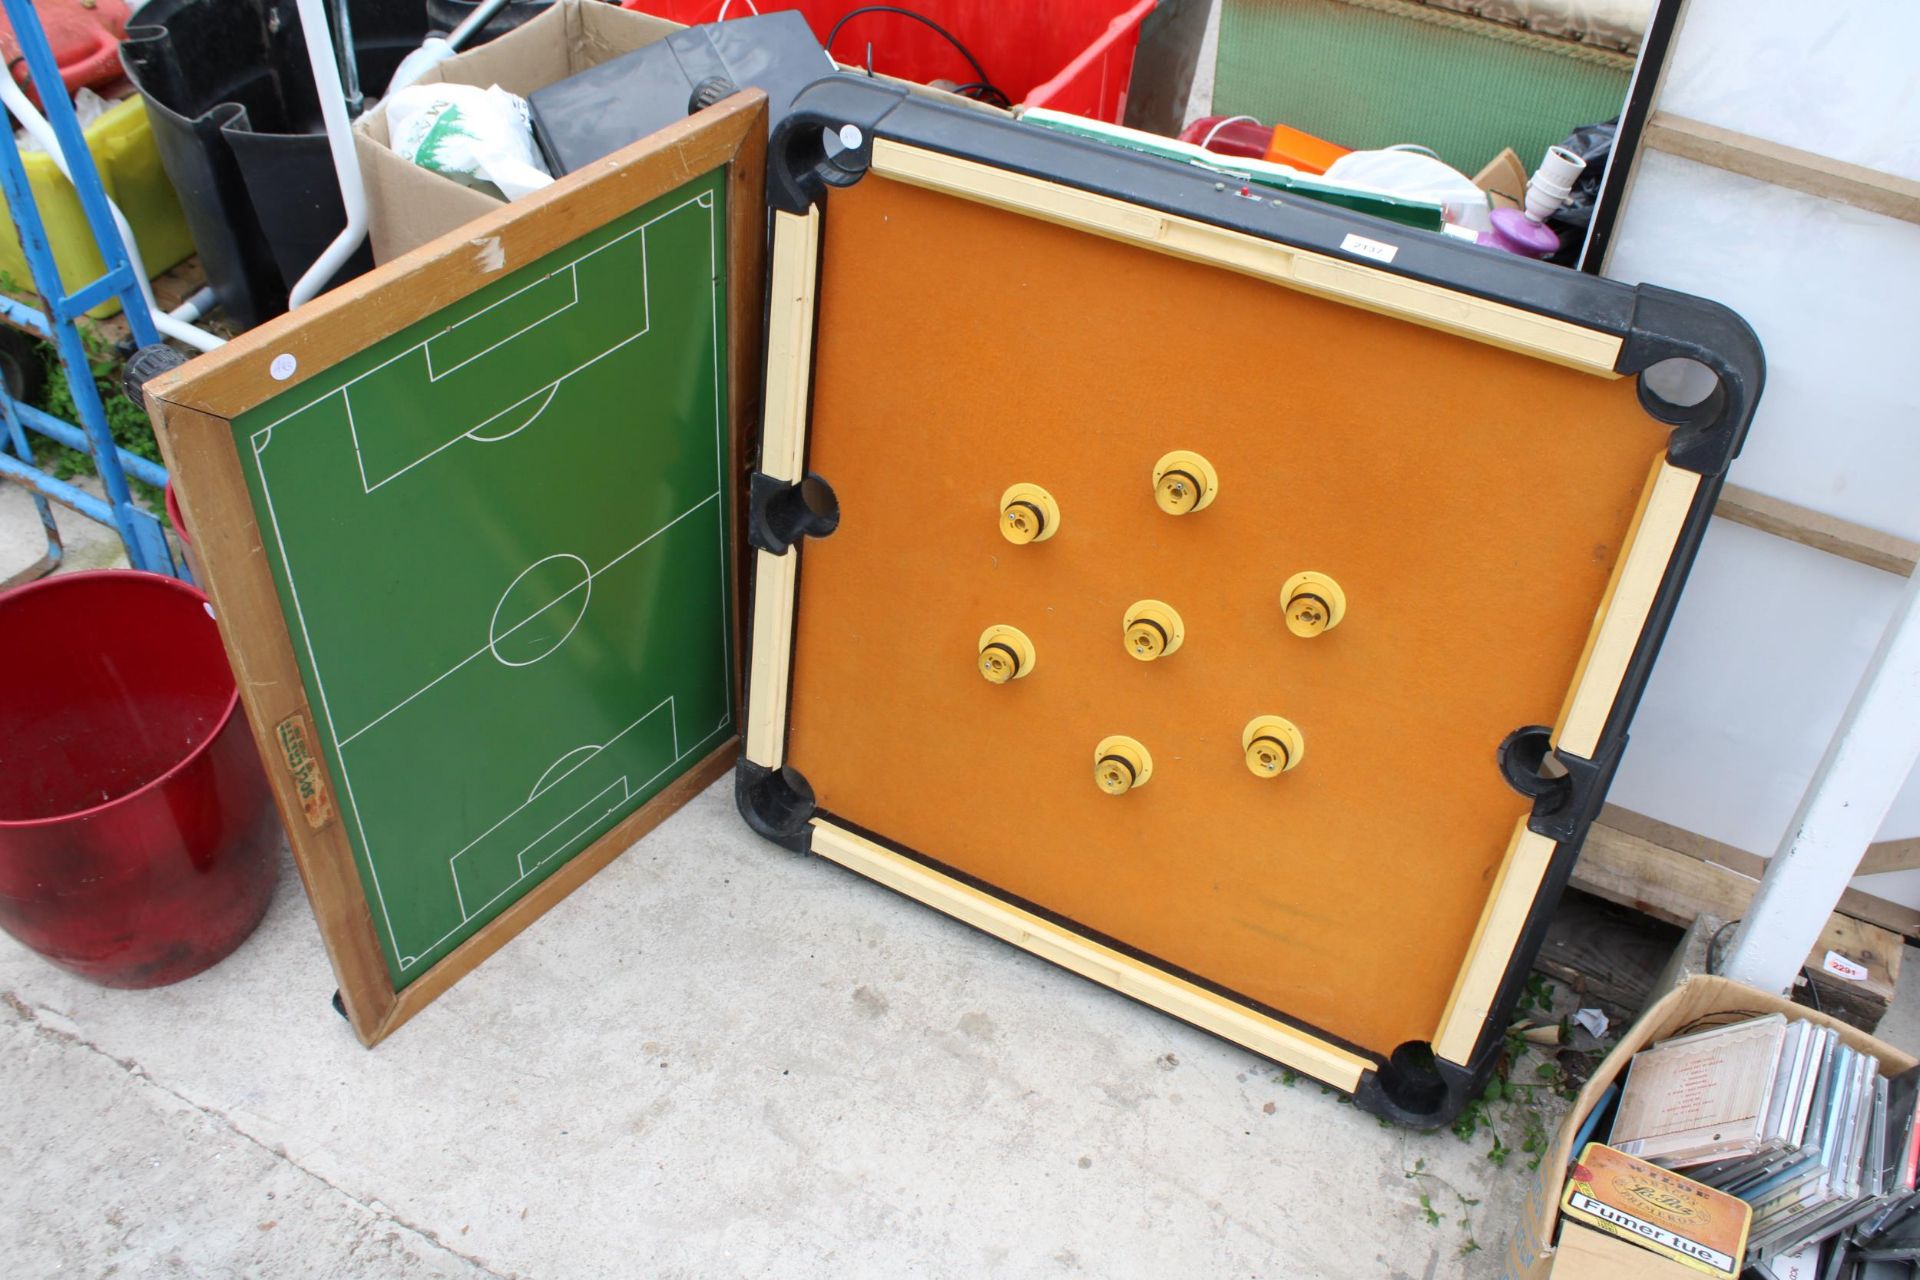 A VINTAGE BILLIARDS GAME AND A WOODEN FOOTBALL TABLE